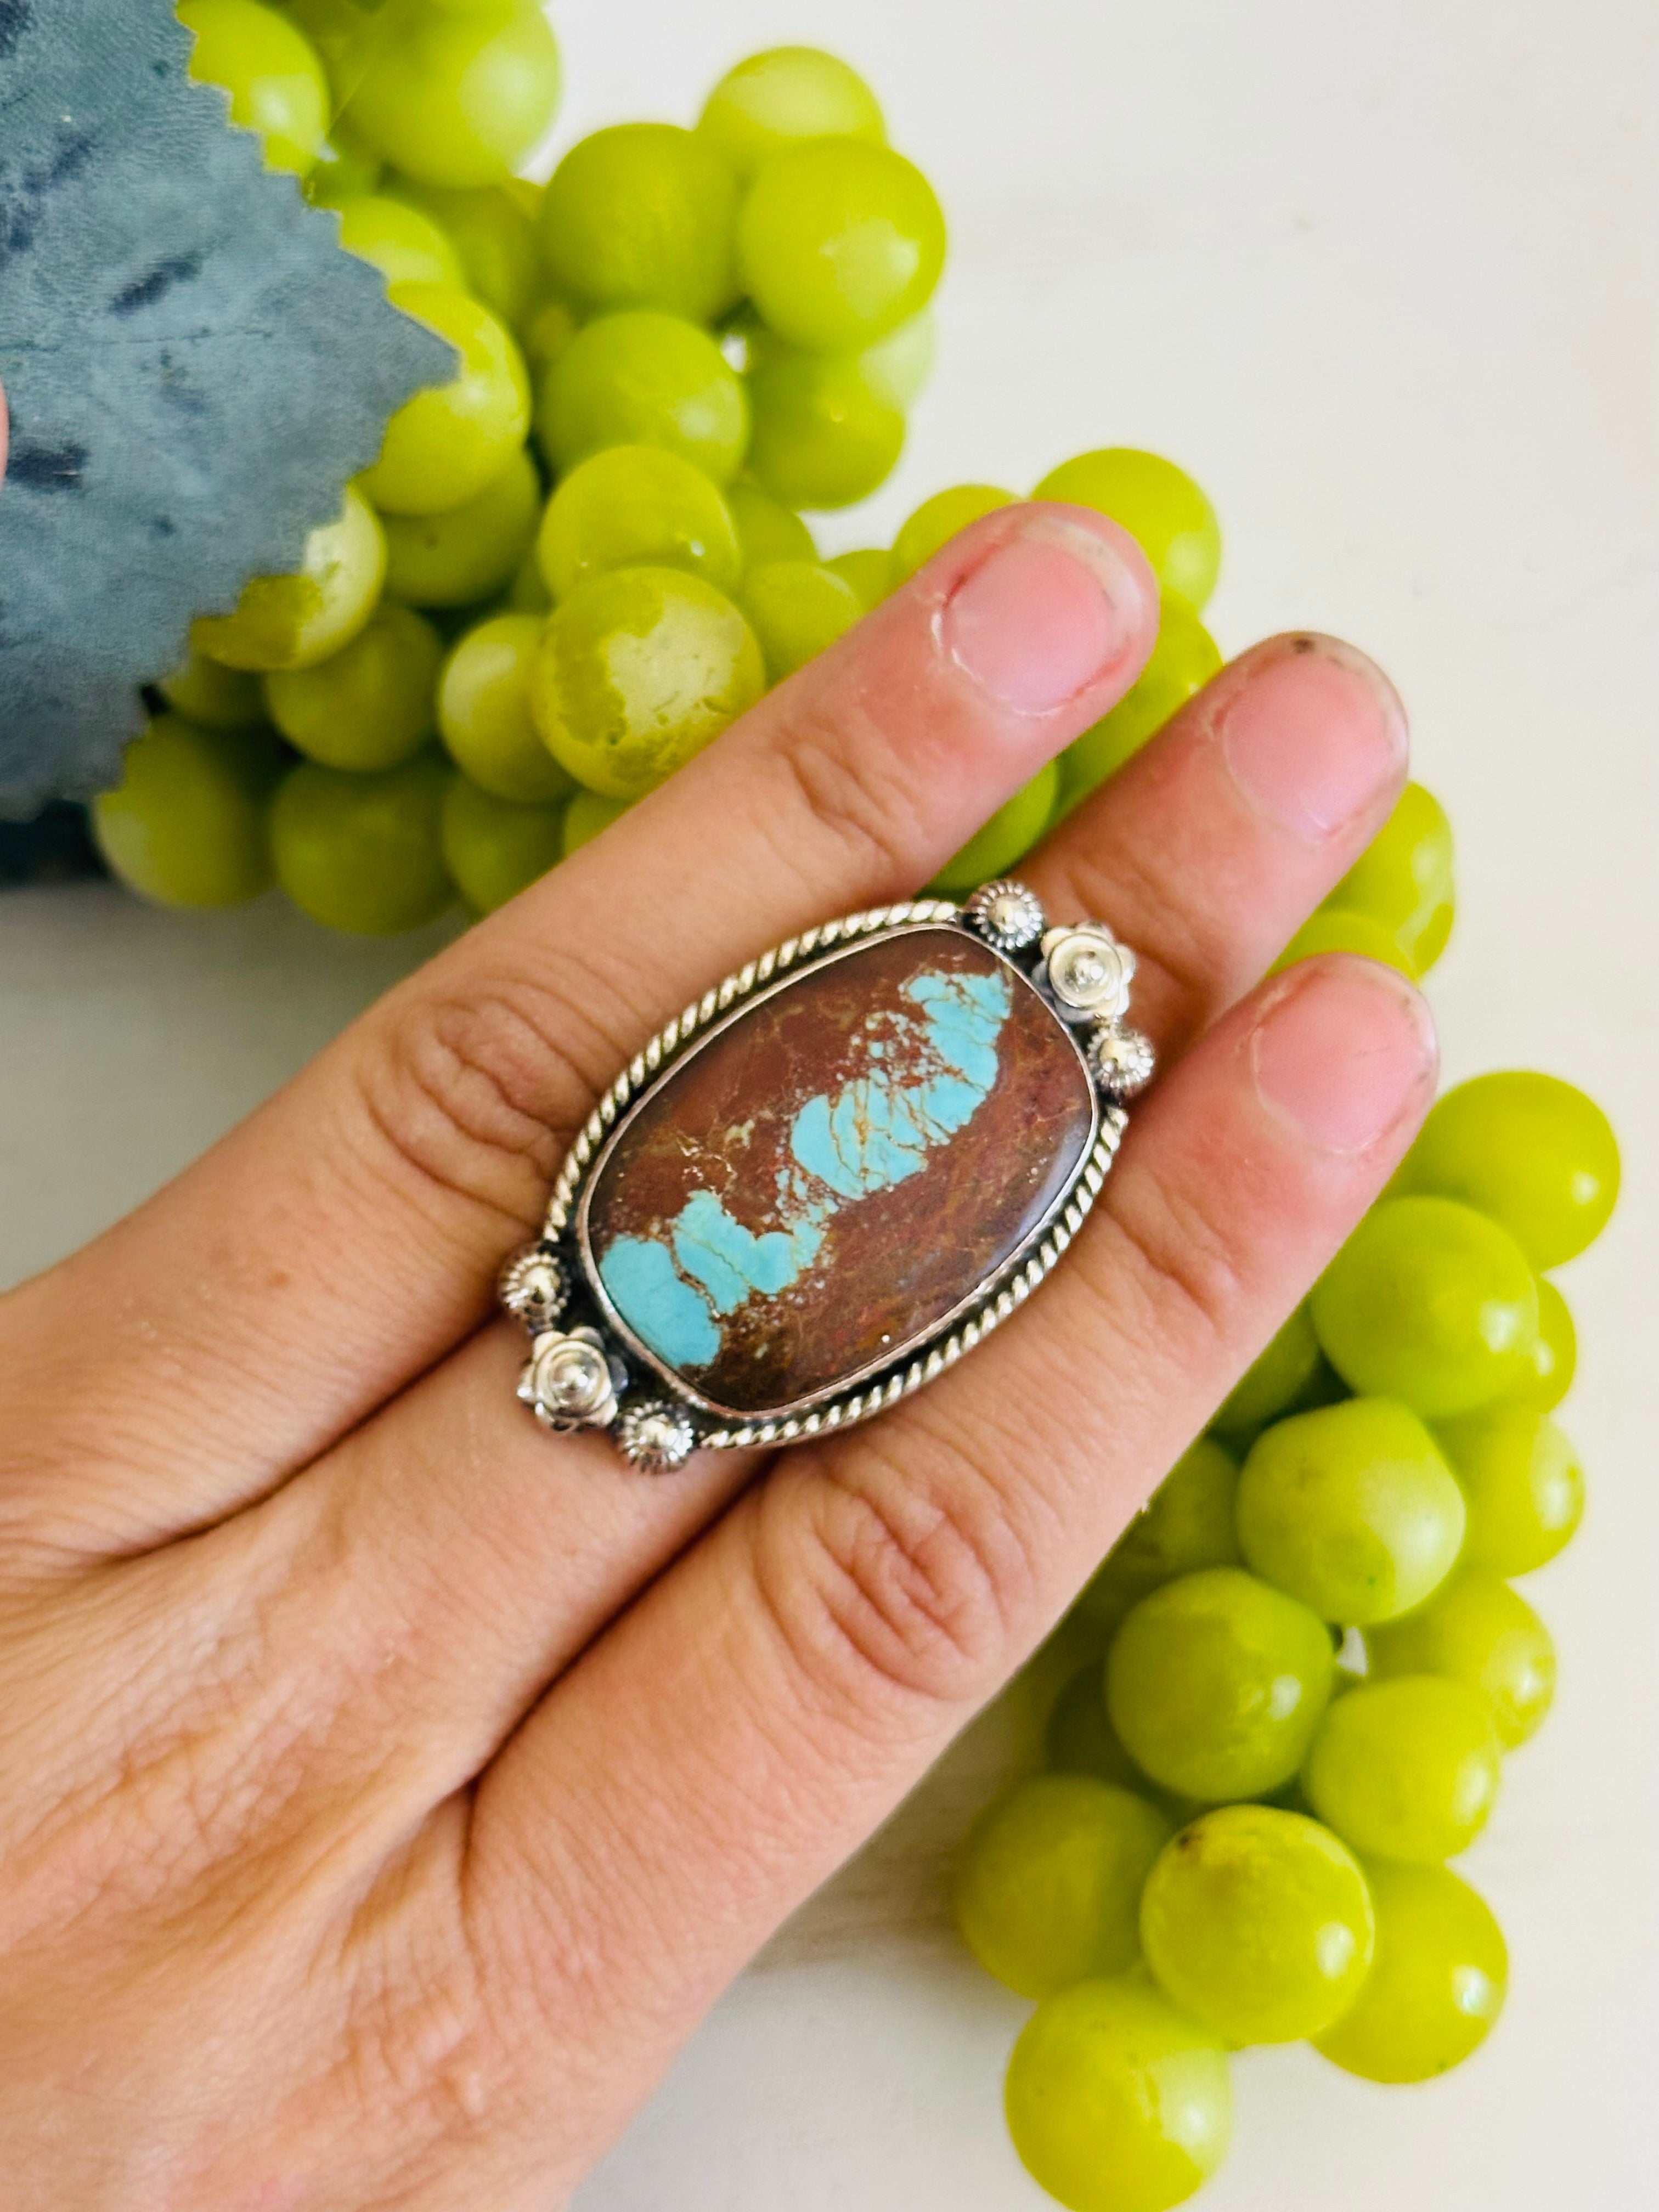 Southwest Handmade #8 Turquoise & Sterling Silver Adjustable Ring